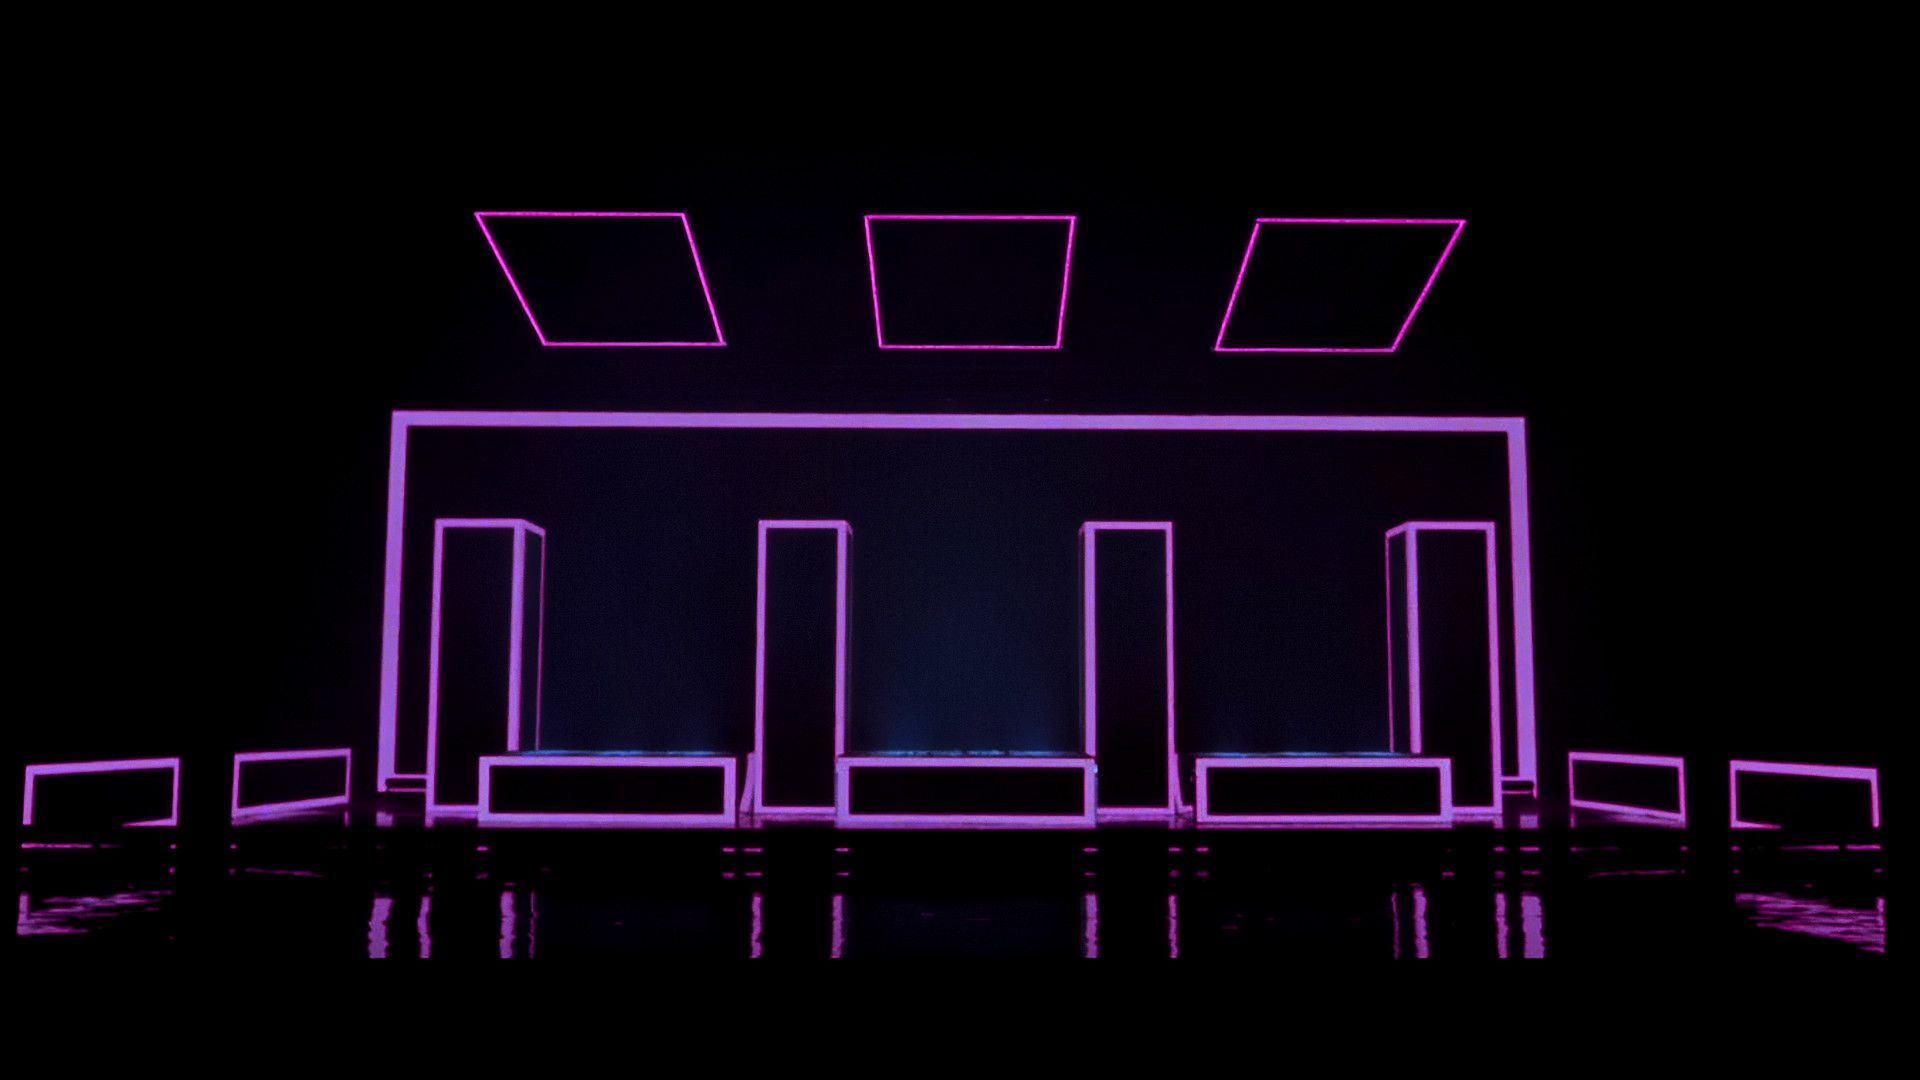 The 1975 Wallpaper Free The 1975 Background